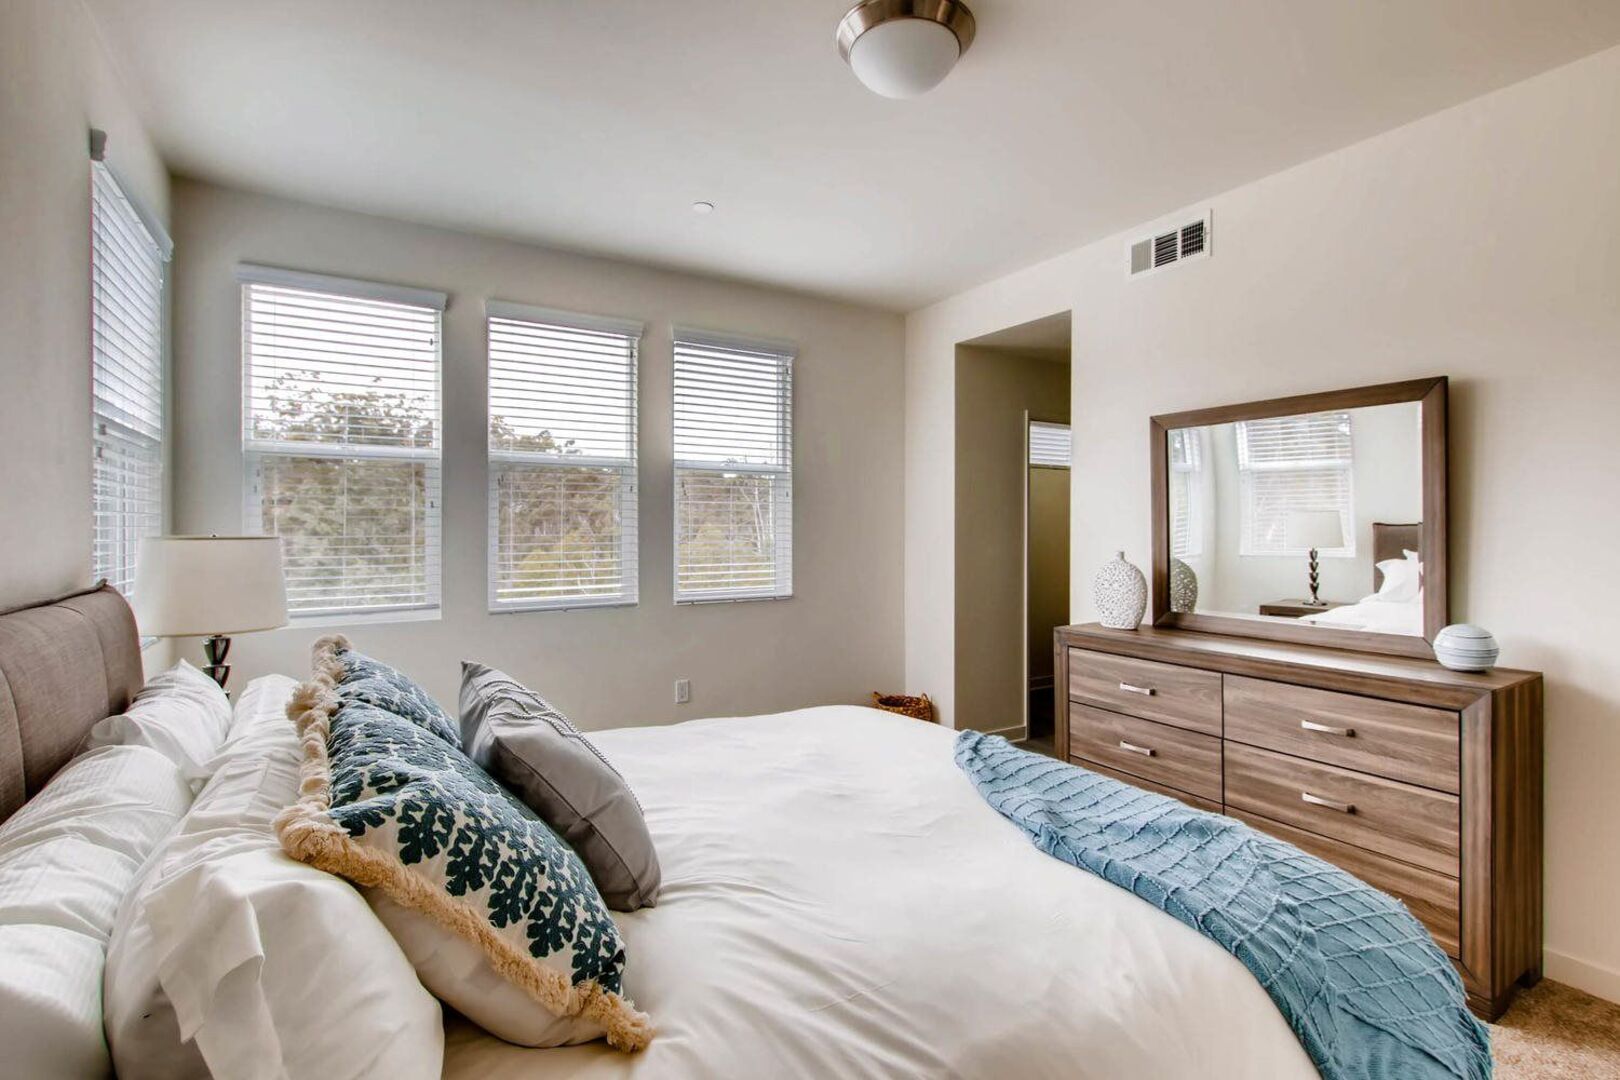 staged bedroom with multiple windows and private bathroom